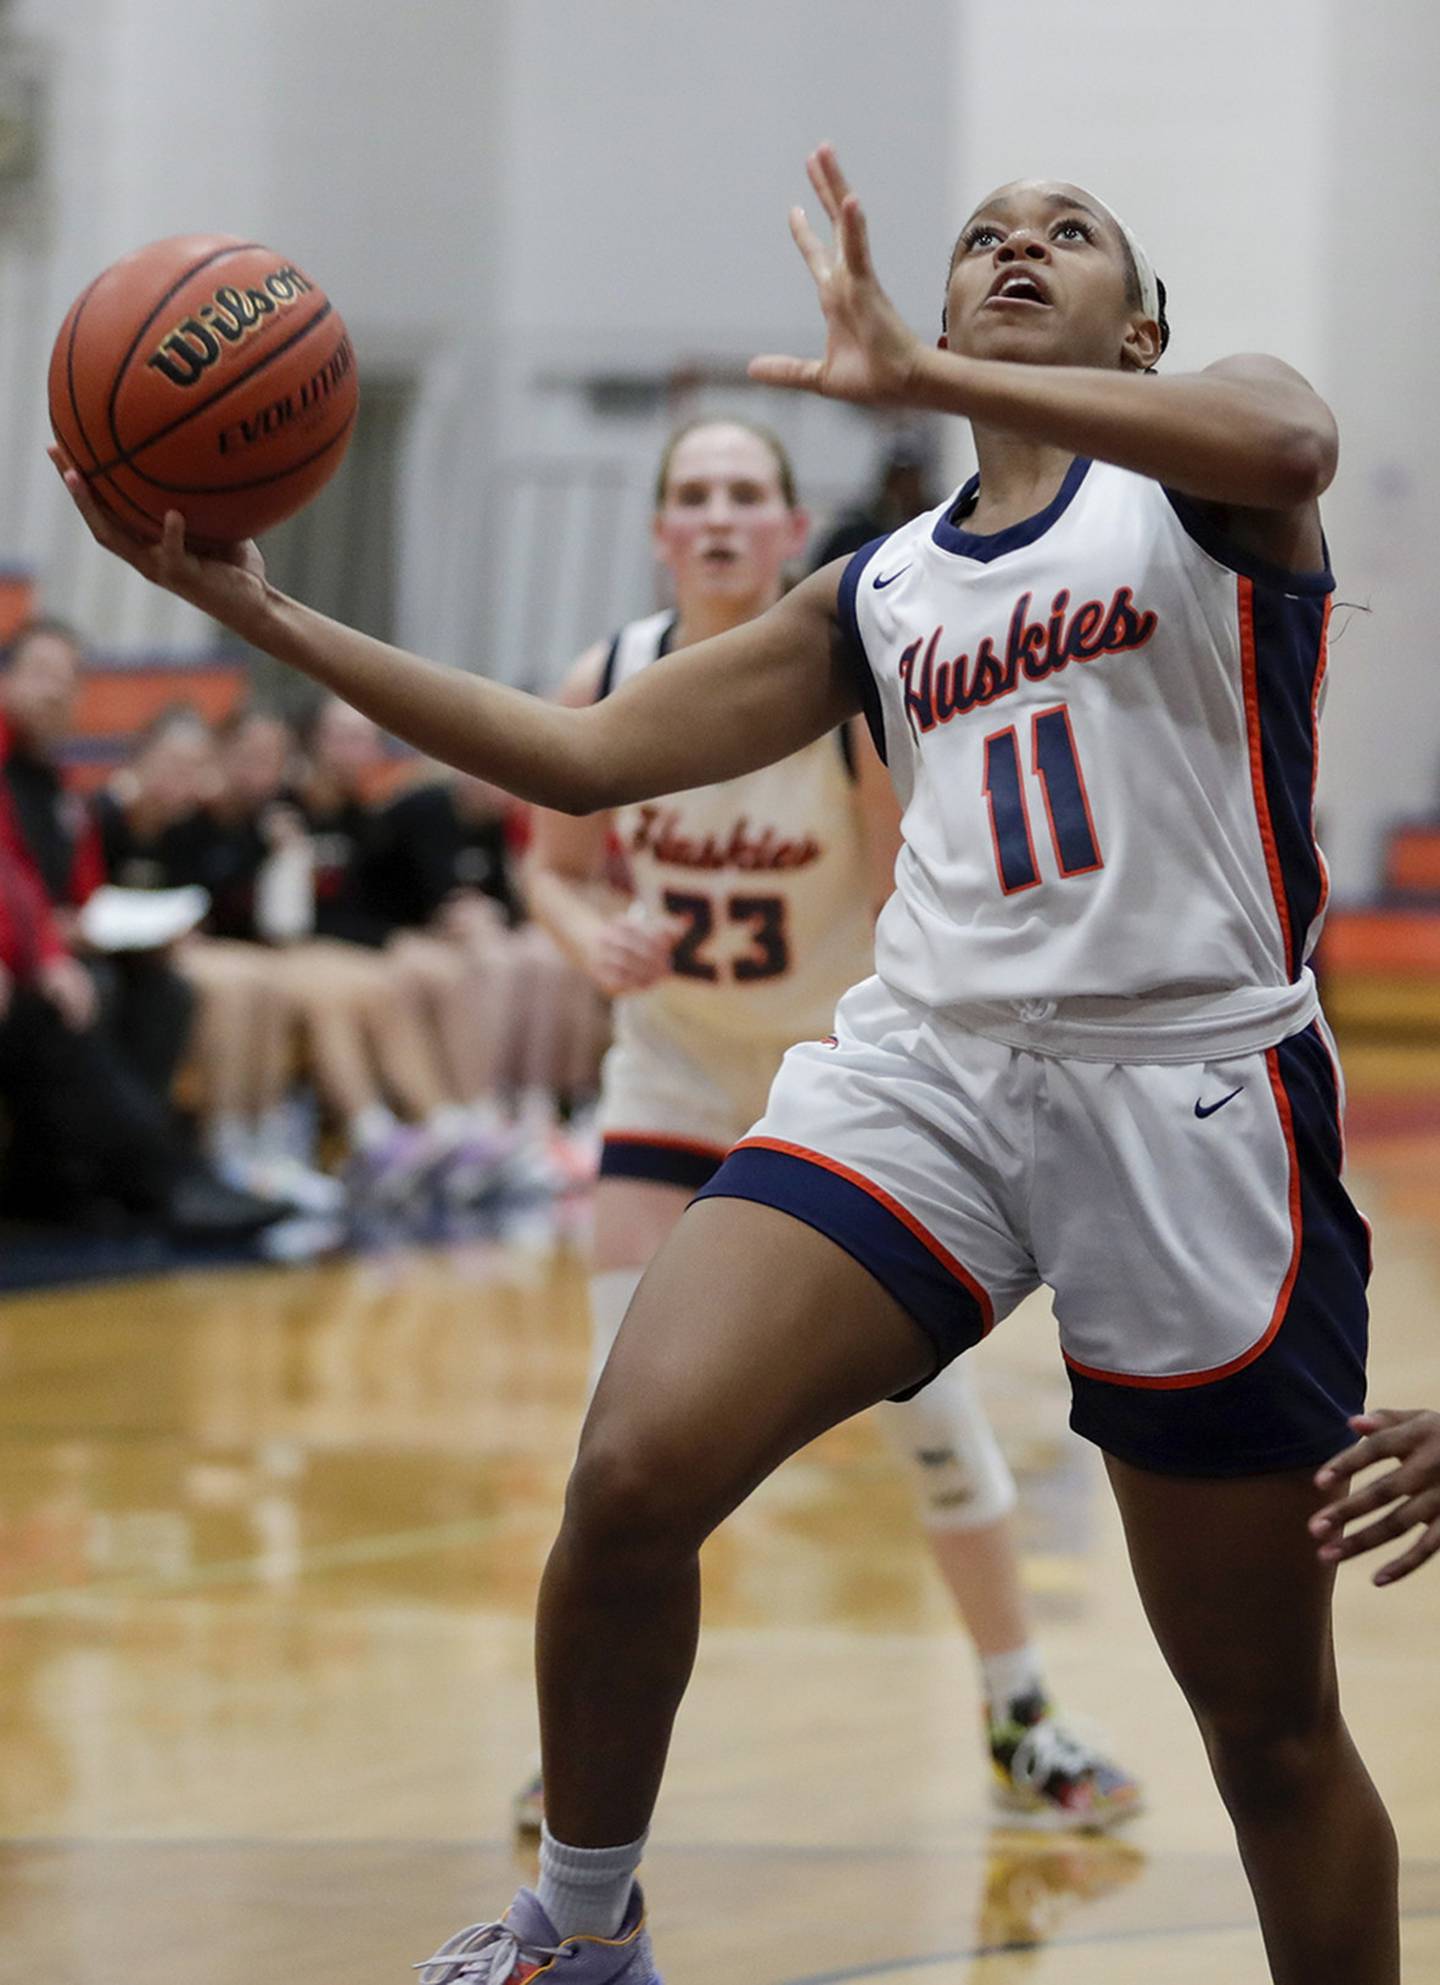 Naperville North’s Layla Henderson (11) goes for a layup against Naperville Central’s Trinity Jones (41) during a DuPage Valley Conference game in Naperville on Wednesday, Dec. 14, 2022.